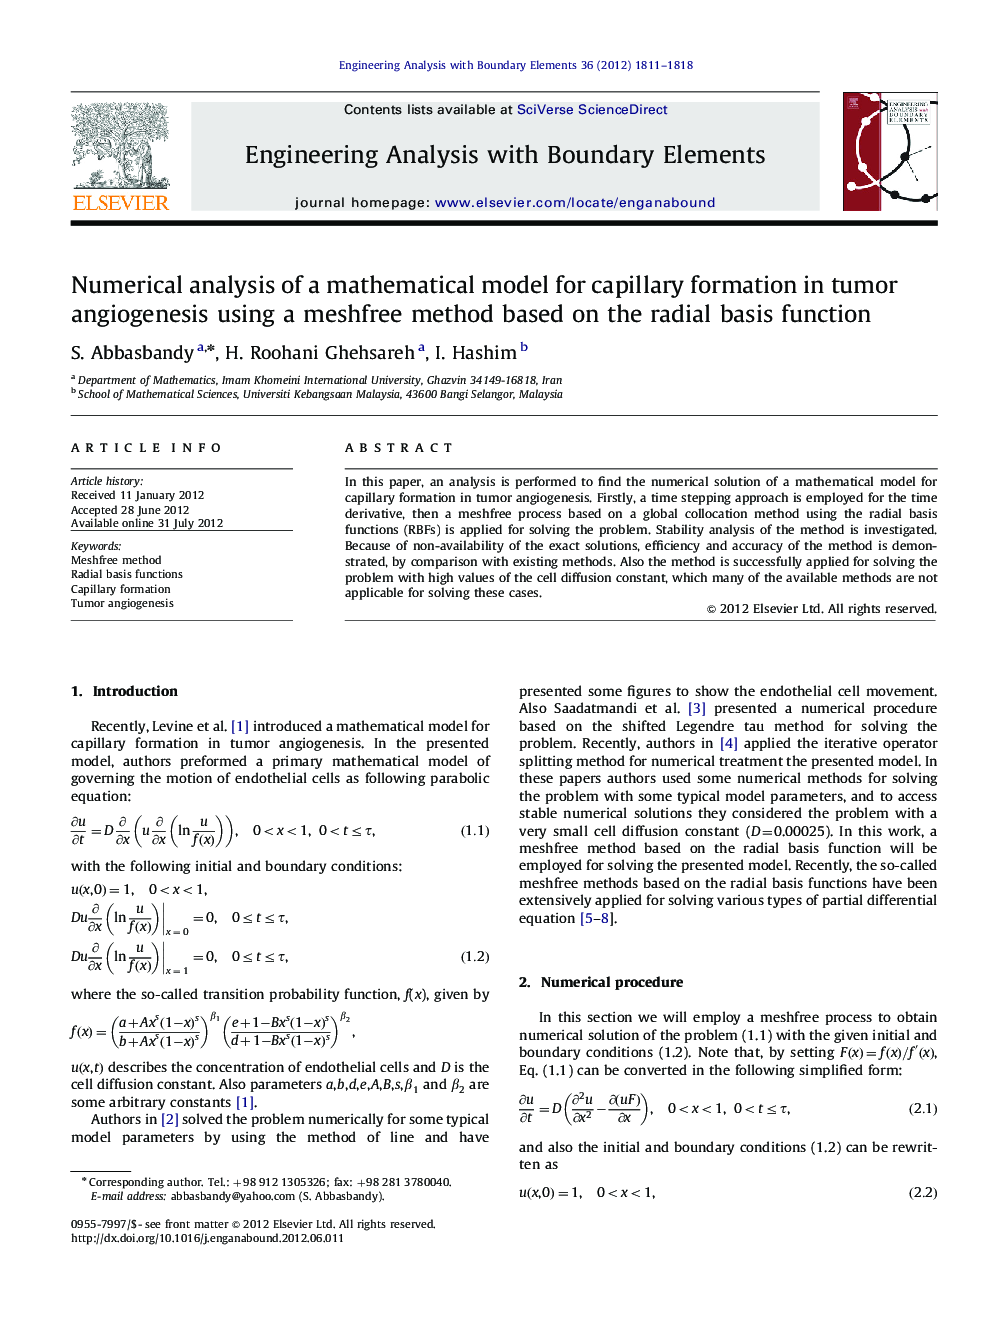 Numerical analysis of a mathematical model for capillary formation in tumor angiogenesis using a meshfree method based on the radial basis function